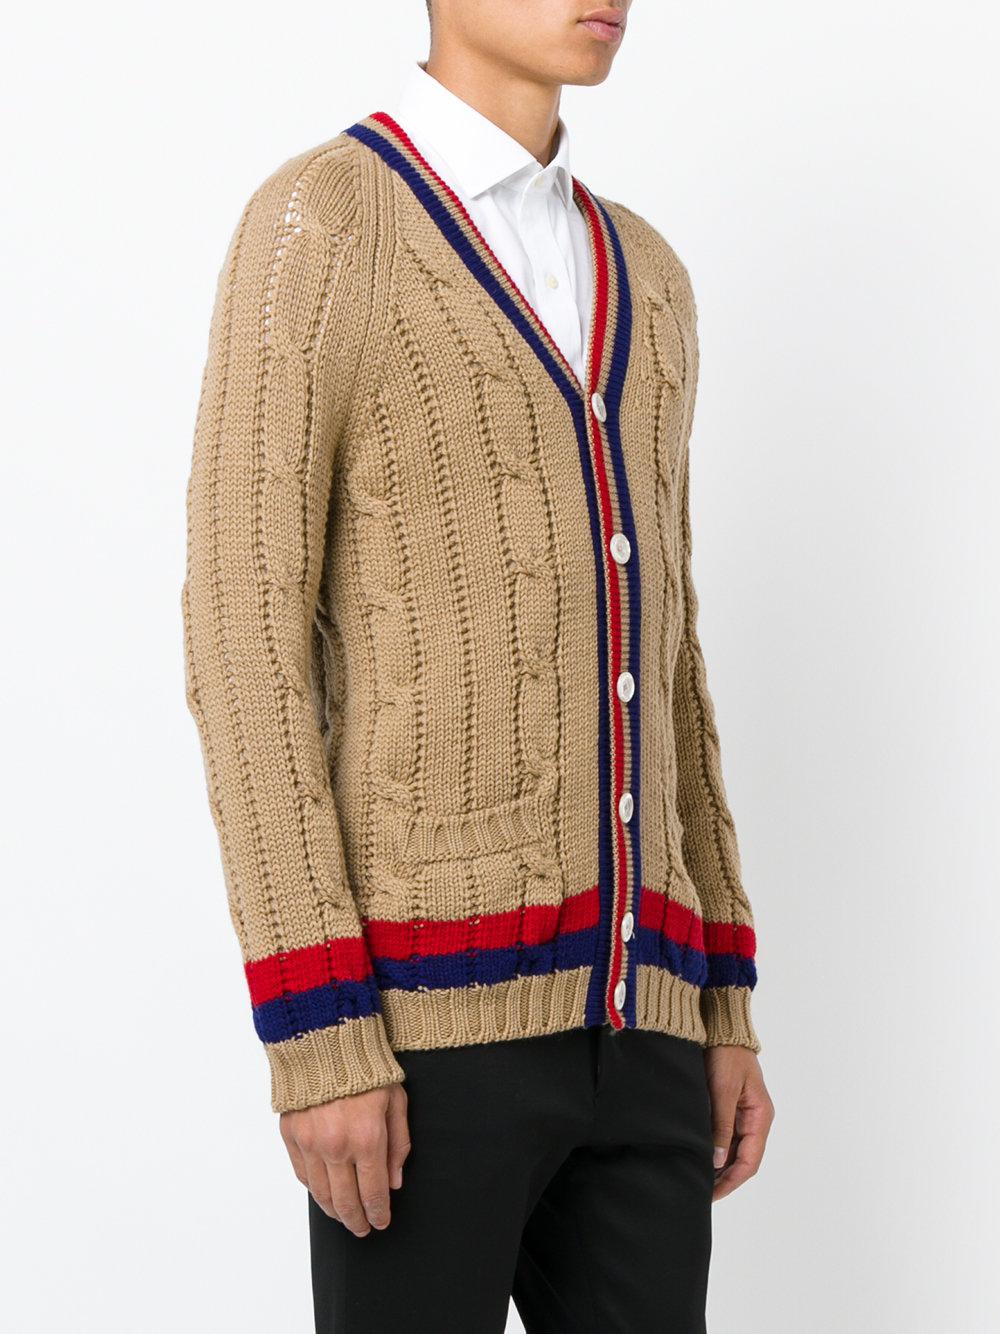 Lyst - Gucci Cable Knit Cardigan in Brown for Men